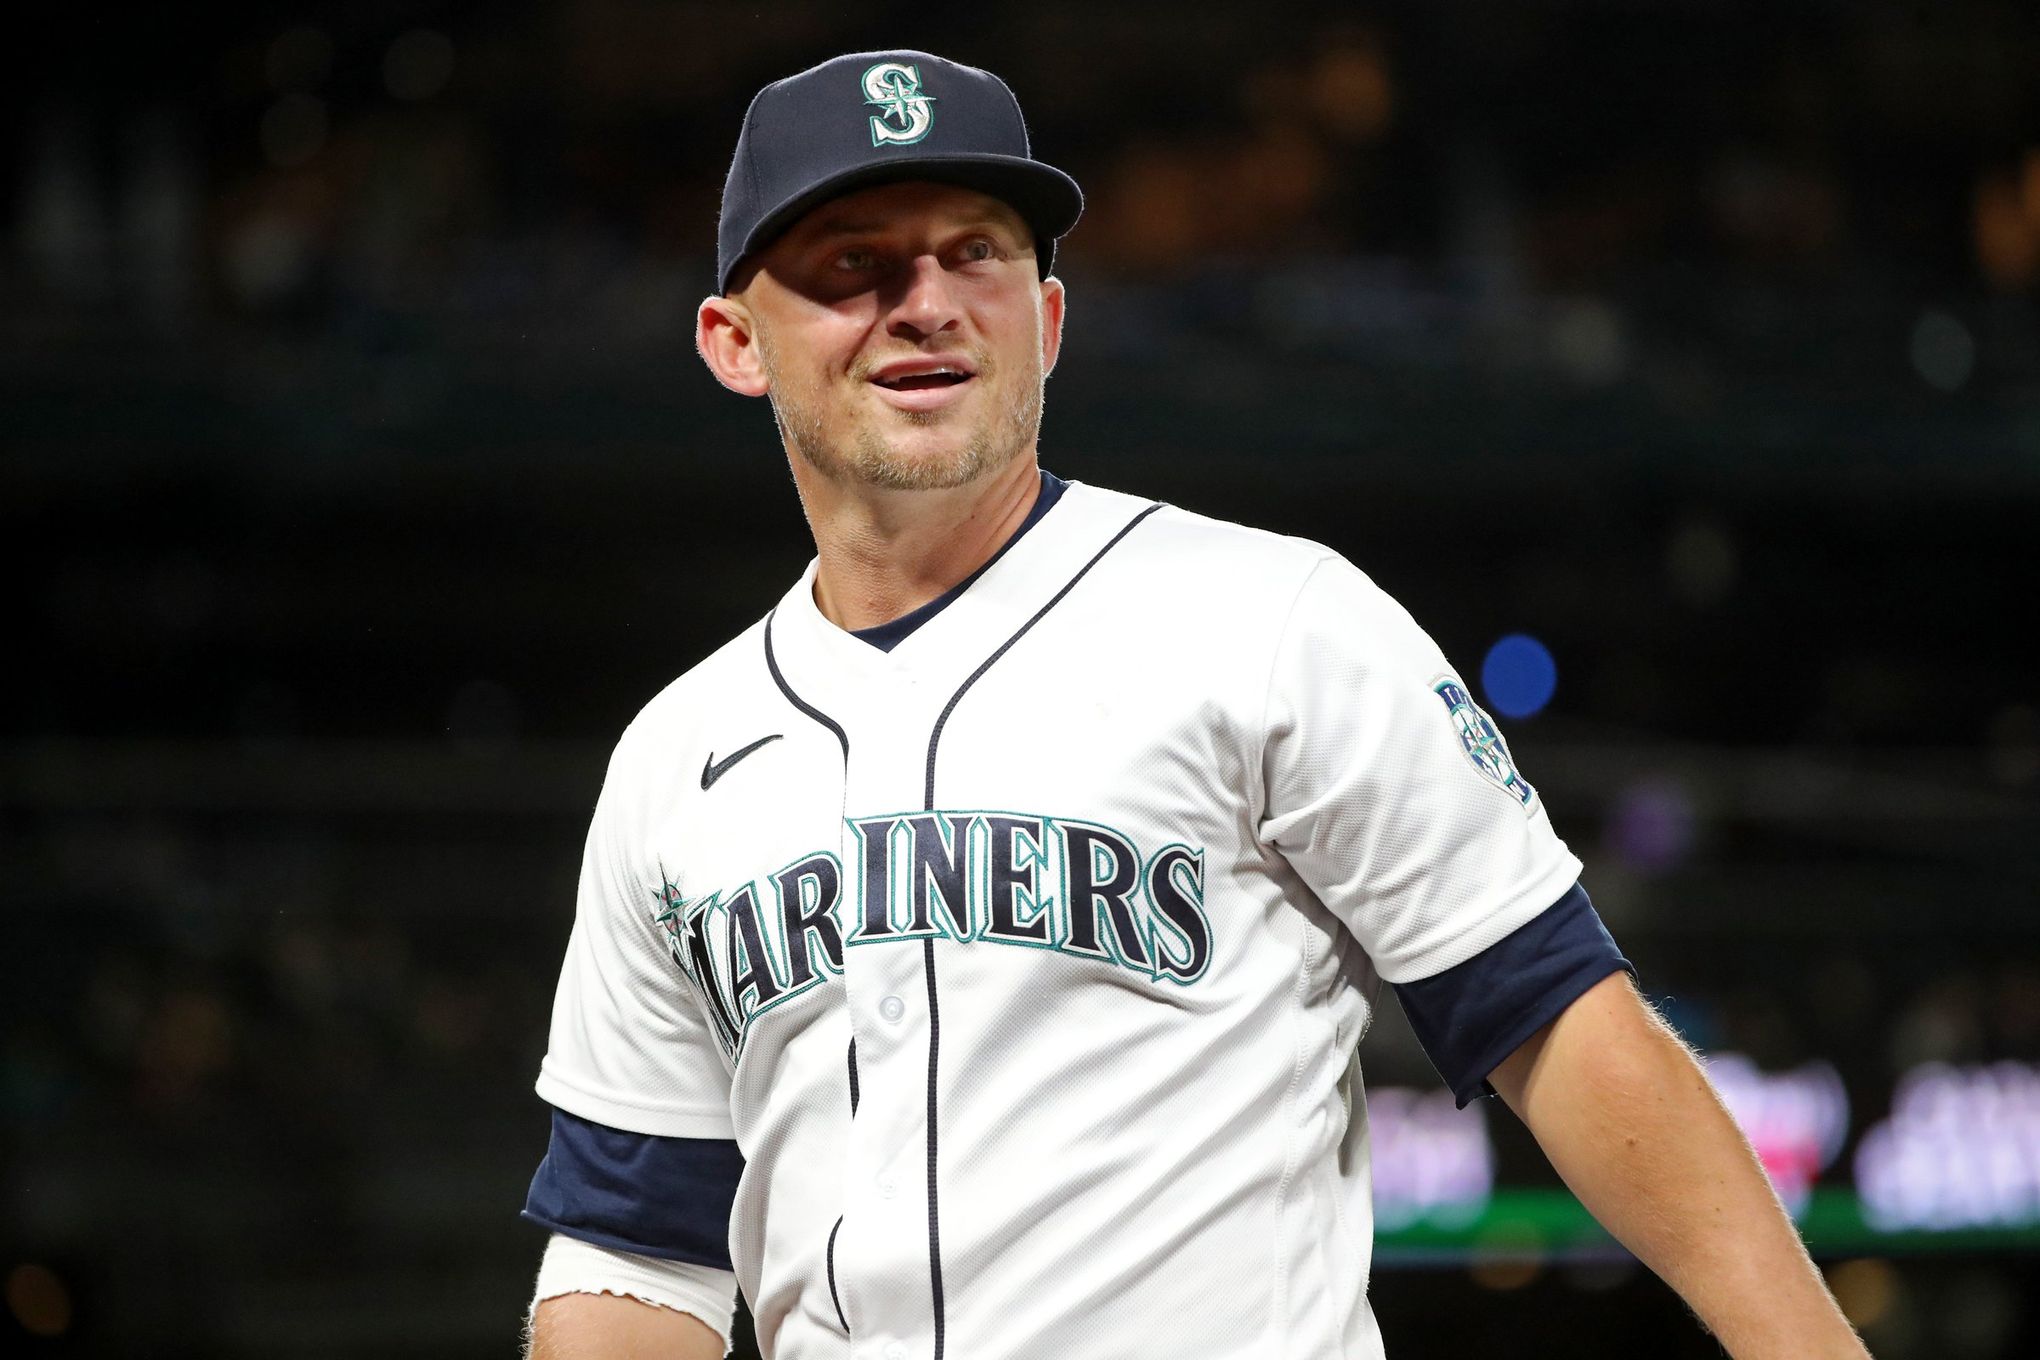 UNC Baseball: Mariners decline Kyle Seager's 2022 option